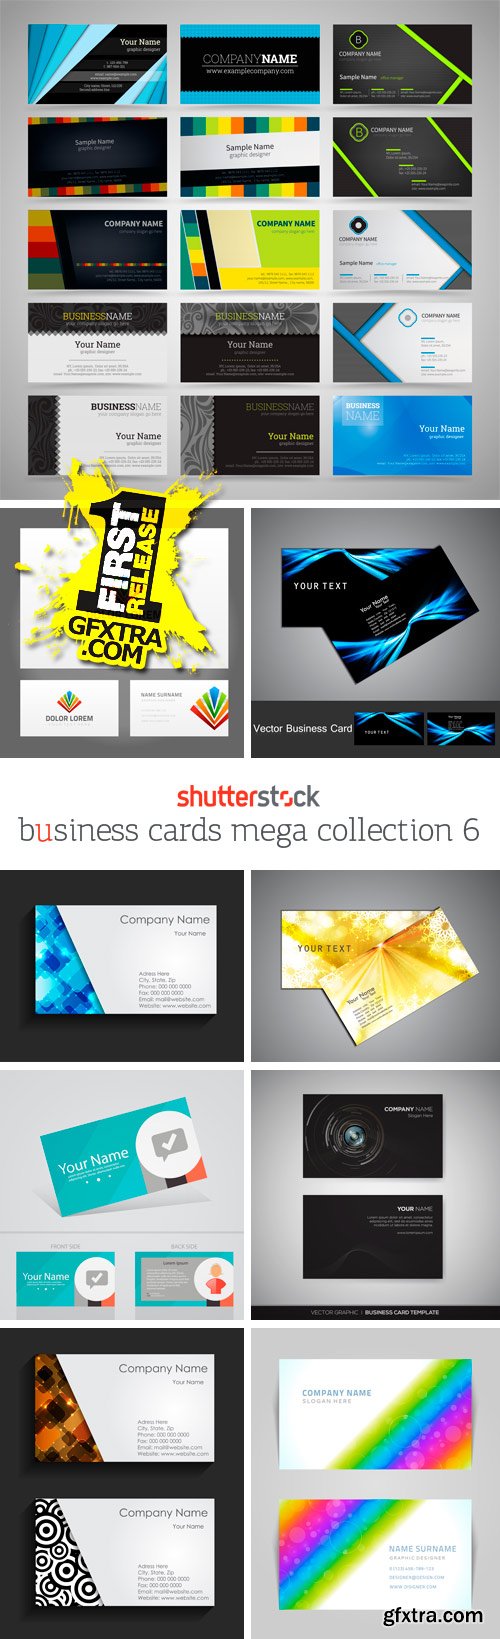 Business Cards Mega Collection 6, 25xEPS